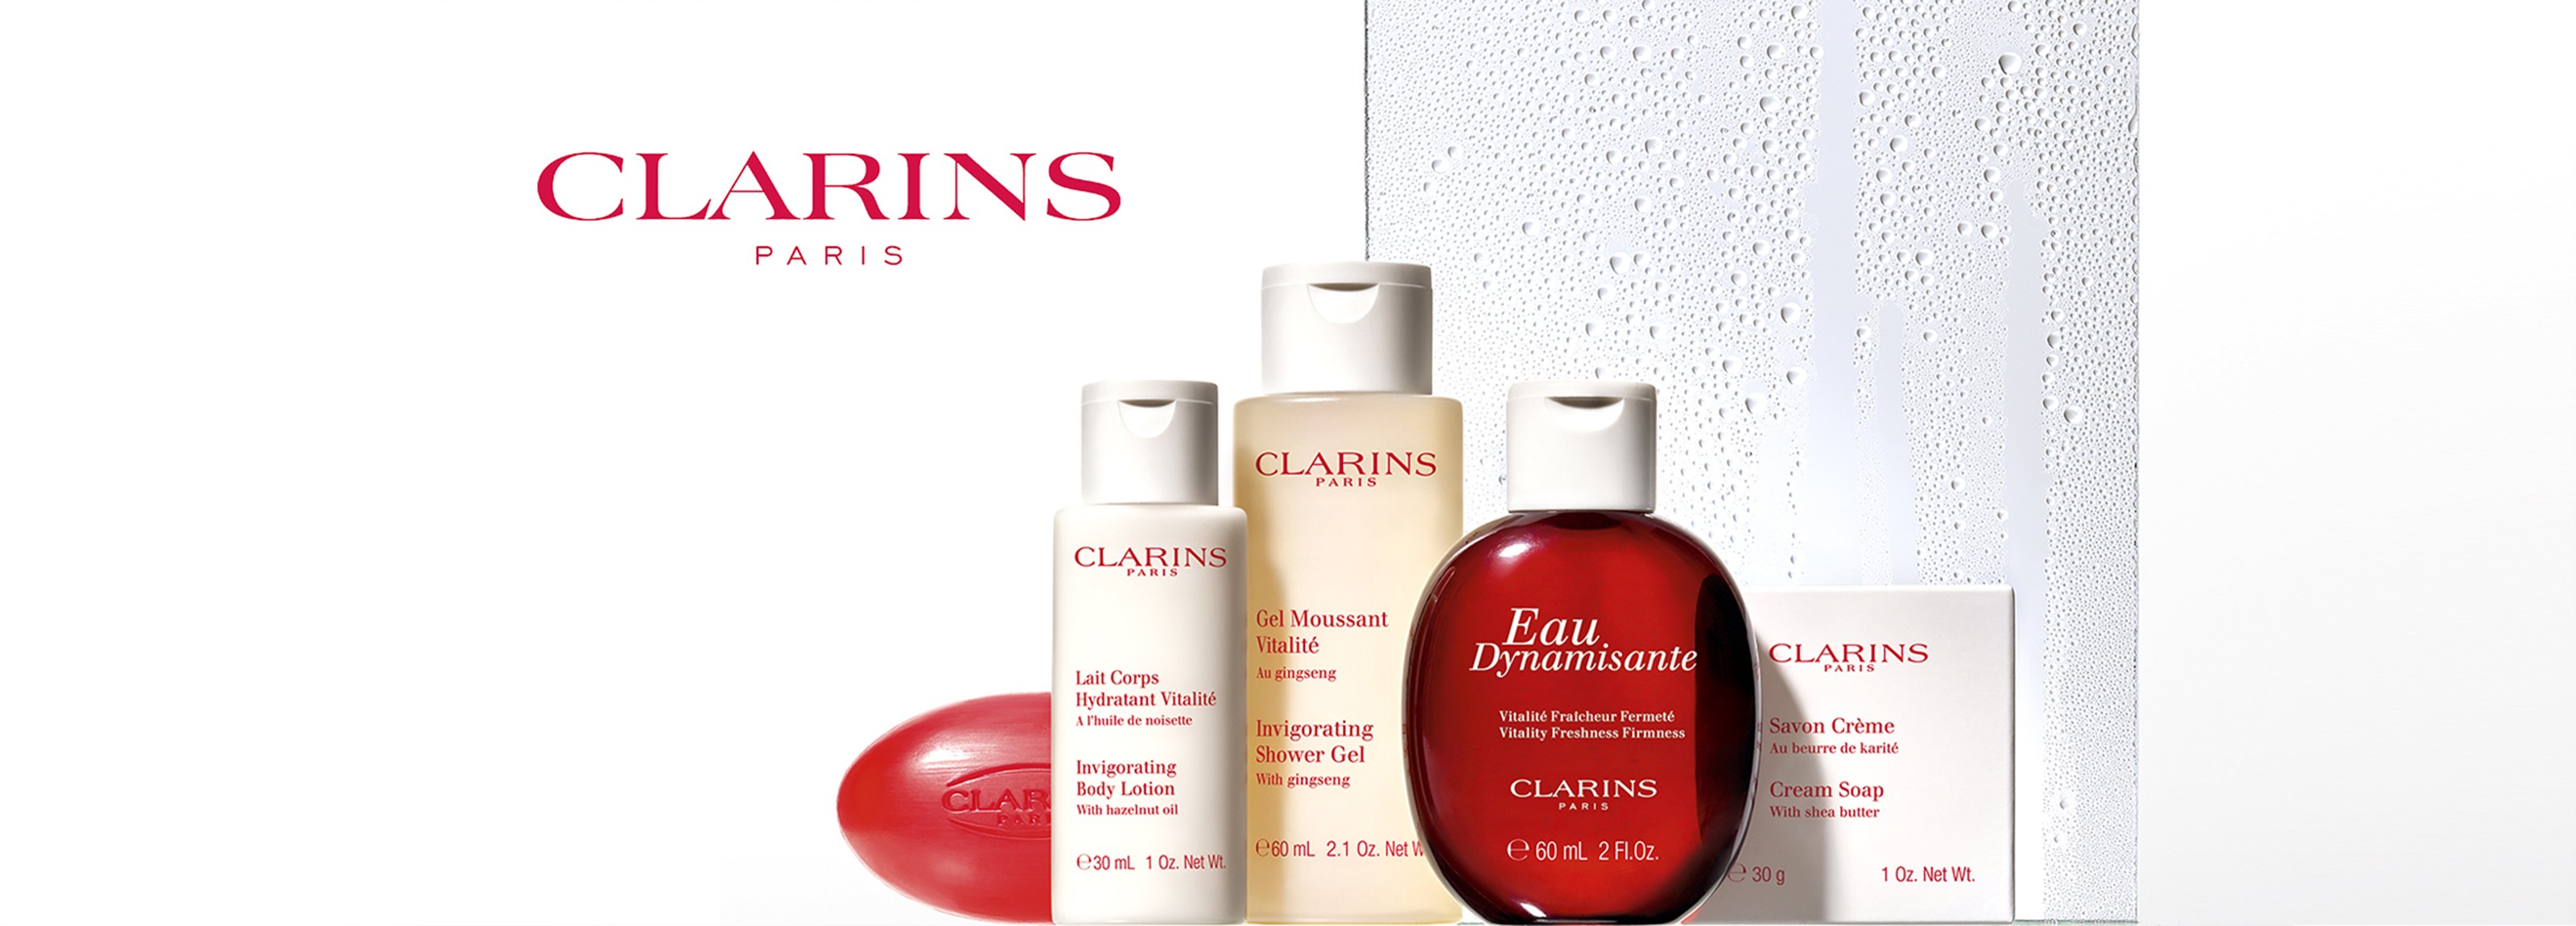 clarins bathroom products with wet wall and logo